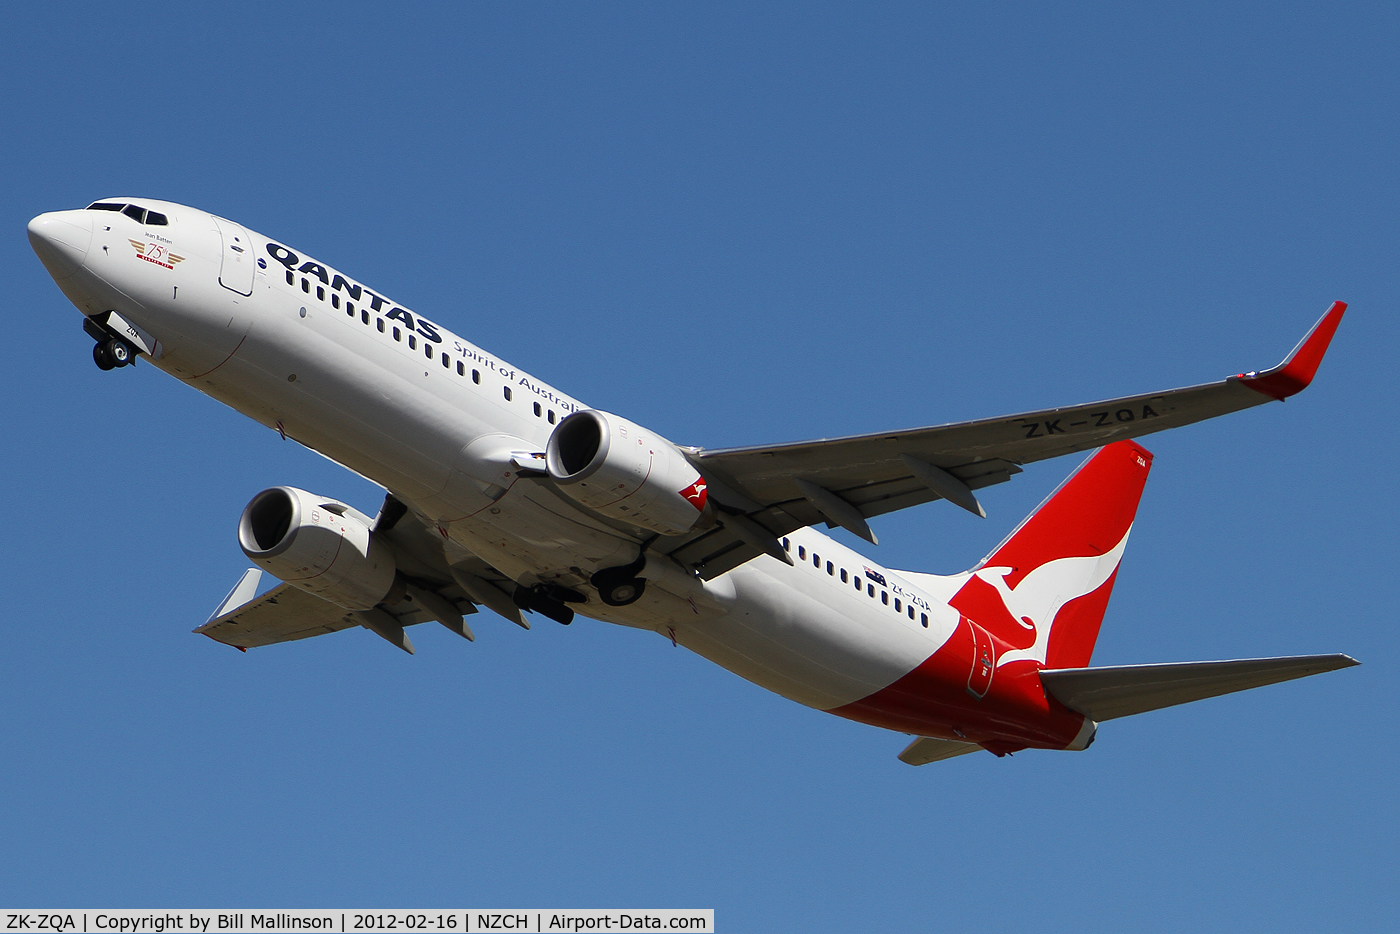 ZK-ZQA, 2009 Boeing 737-838 C/N 34200, away from 02 as QF046 CHC-SYD